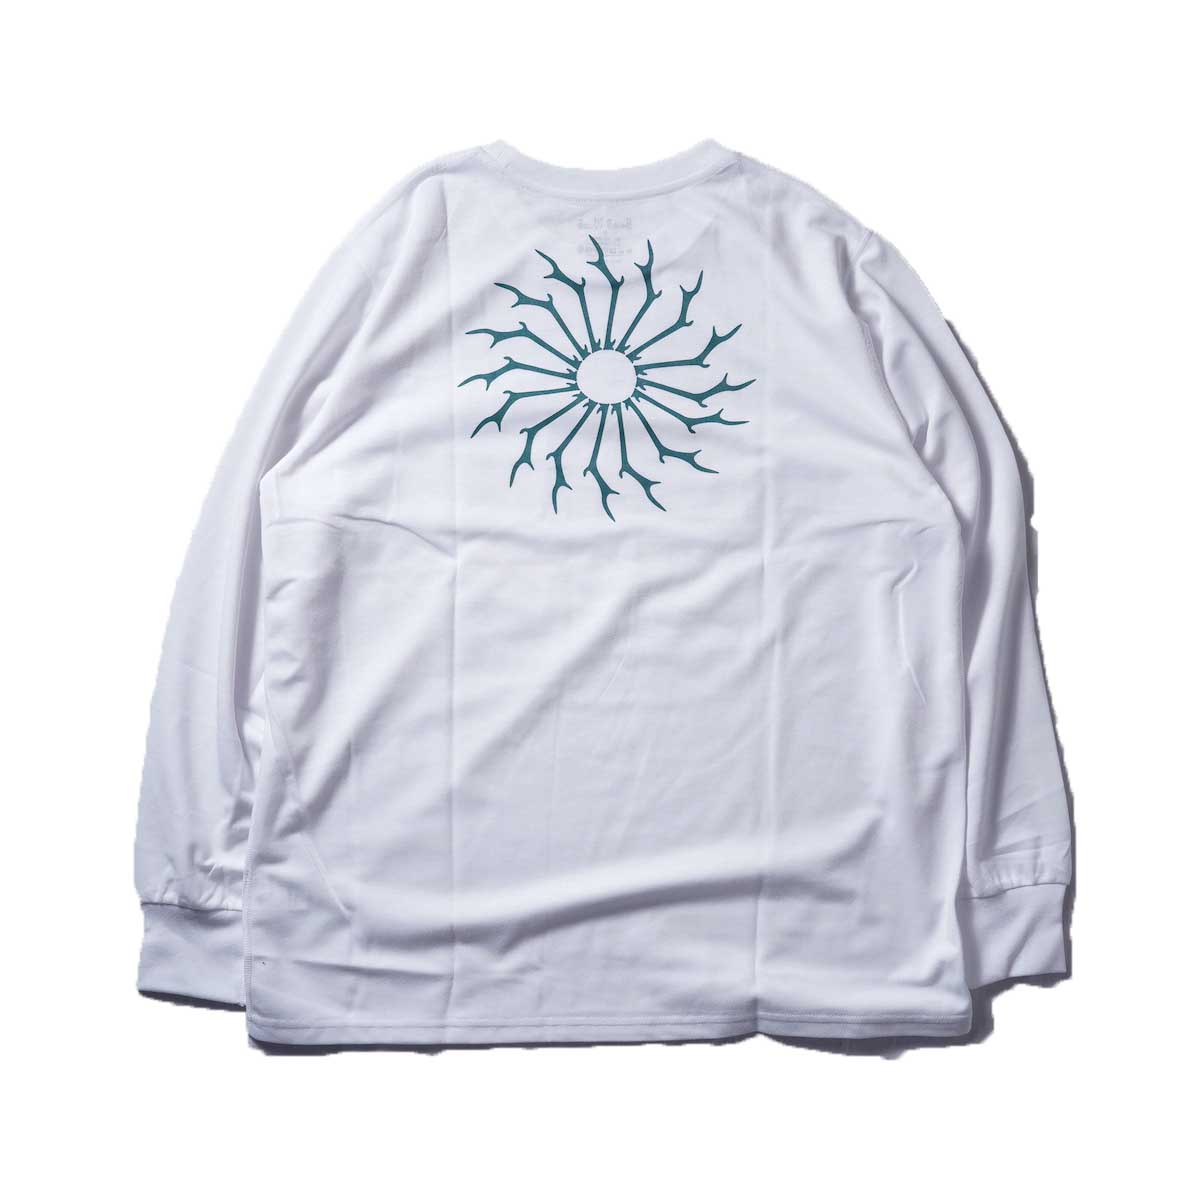 South2 West8 / L/S Round Pocket Tee -Circle Horn (White)背面